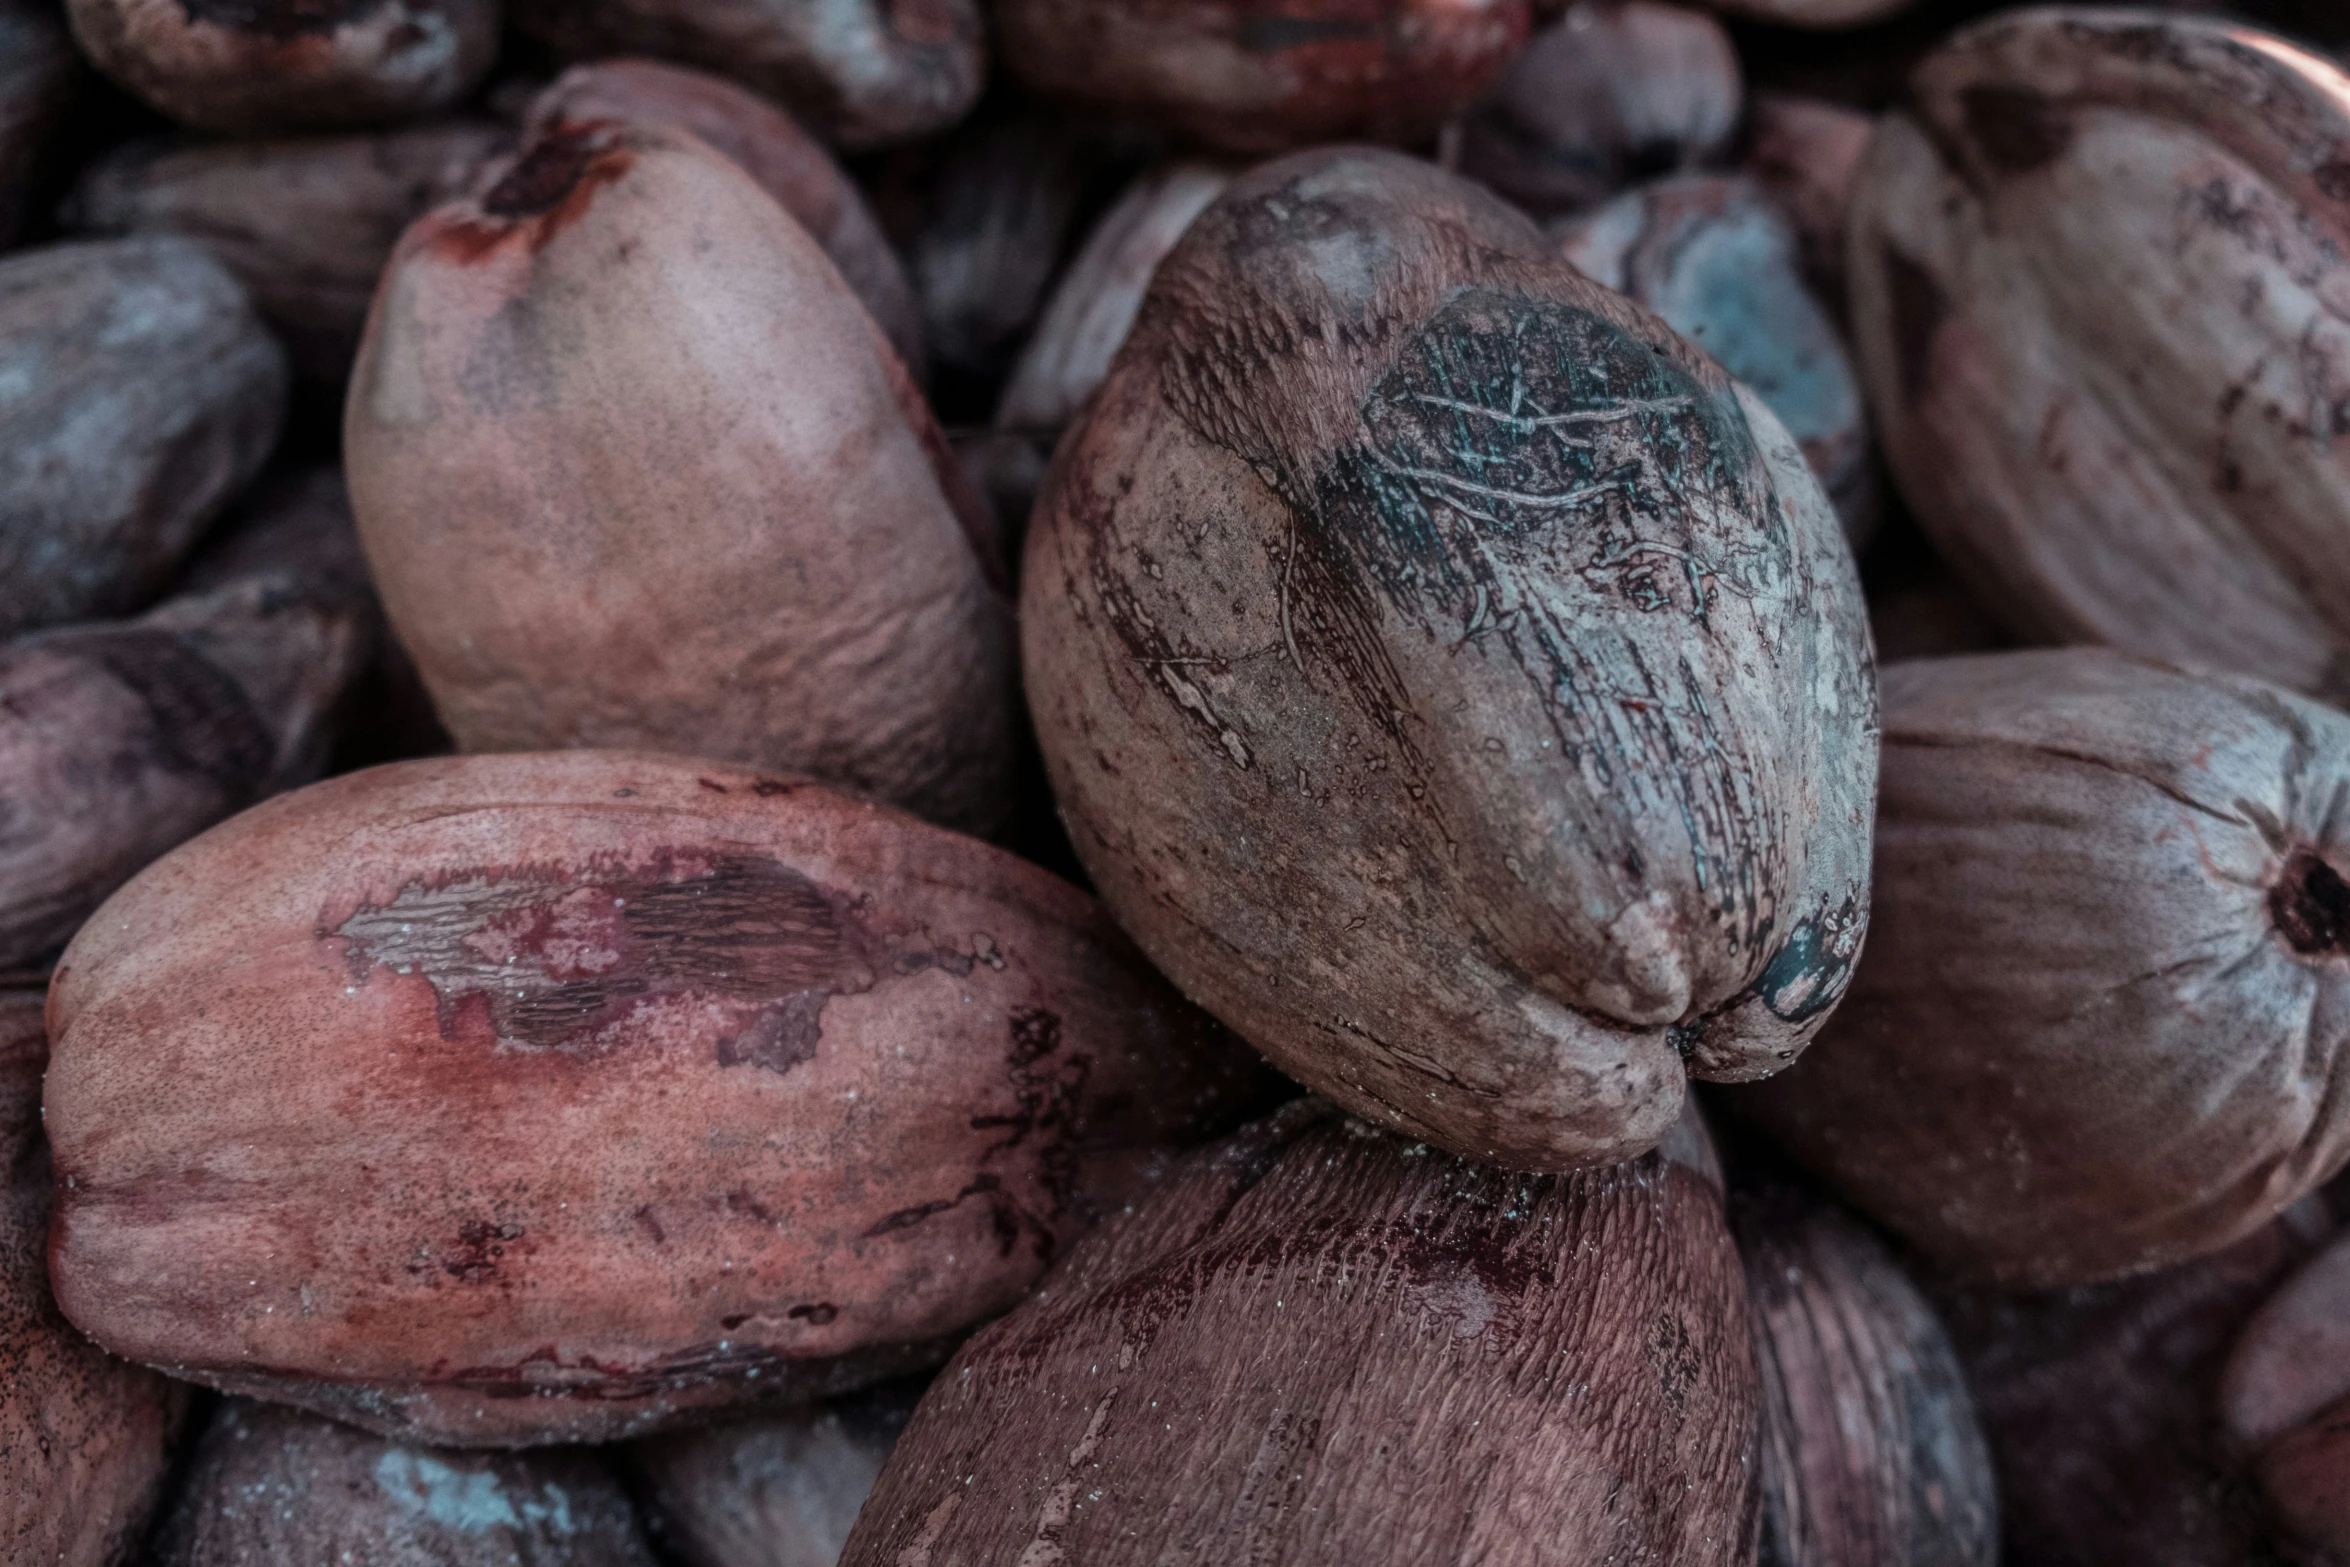 the cocoa beans have been cut open and unpeeled